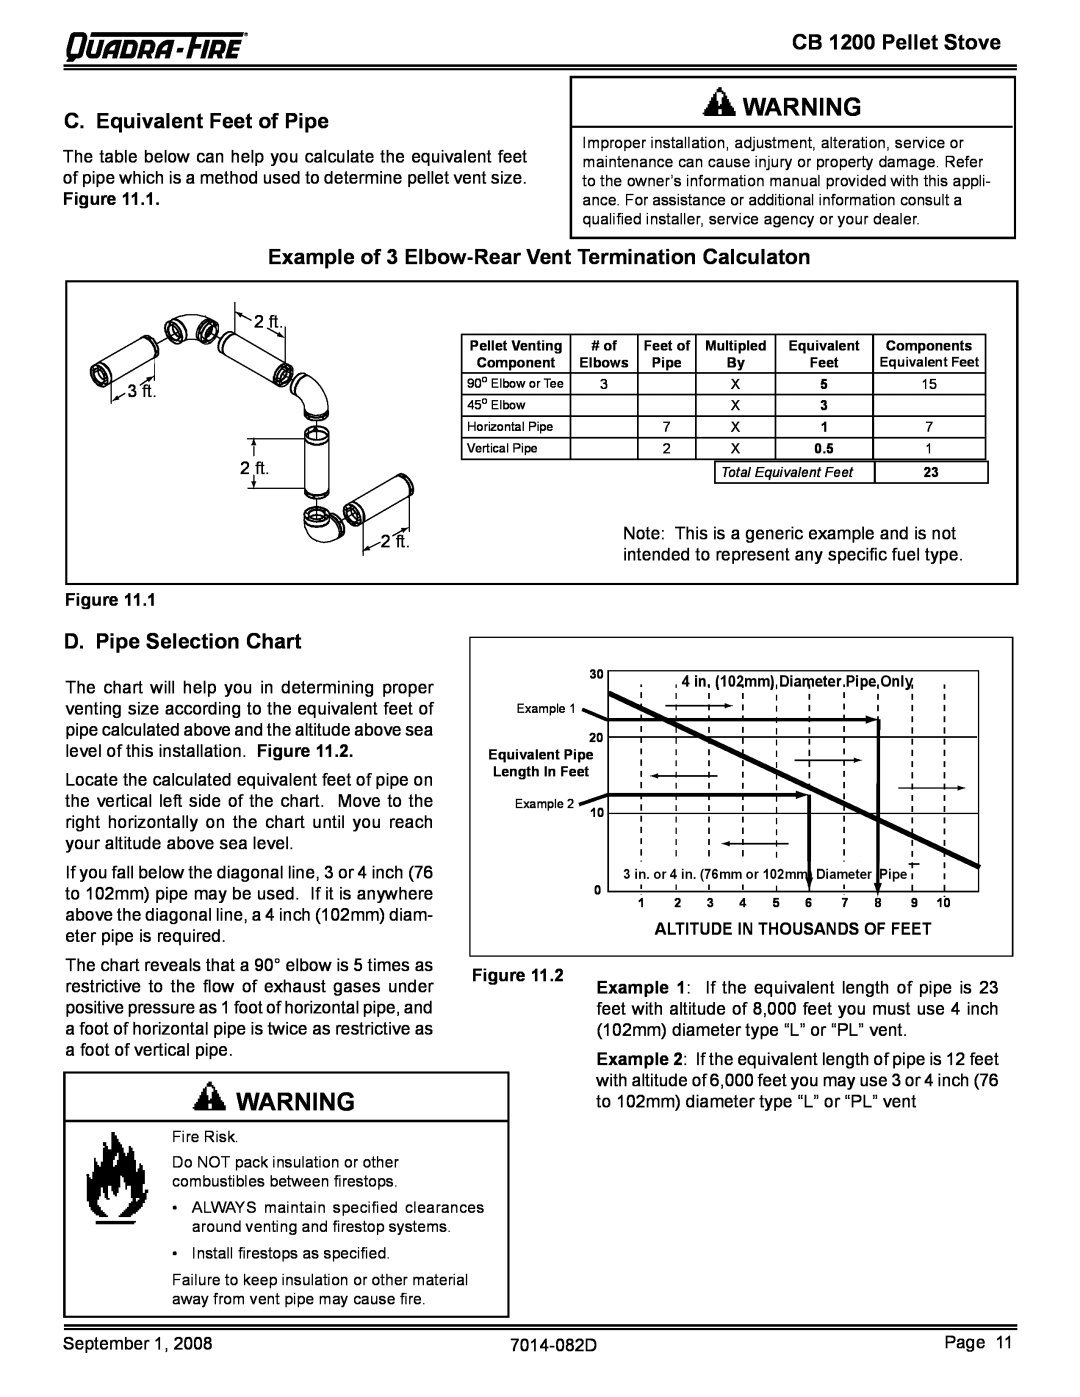 Quadra-Fire CB1200-B C. Equivalent Feet of Pipe, D. Pipe Selection Chart, CB 1200 Pellet Stove, eter pipe is required 